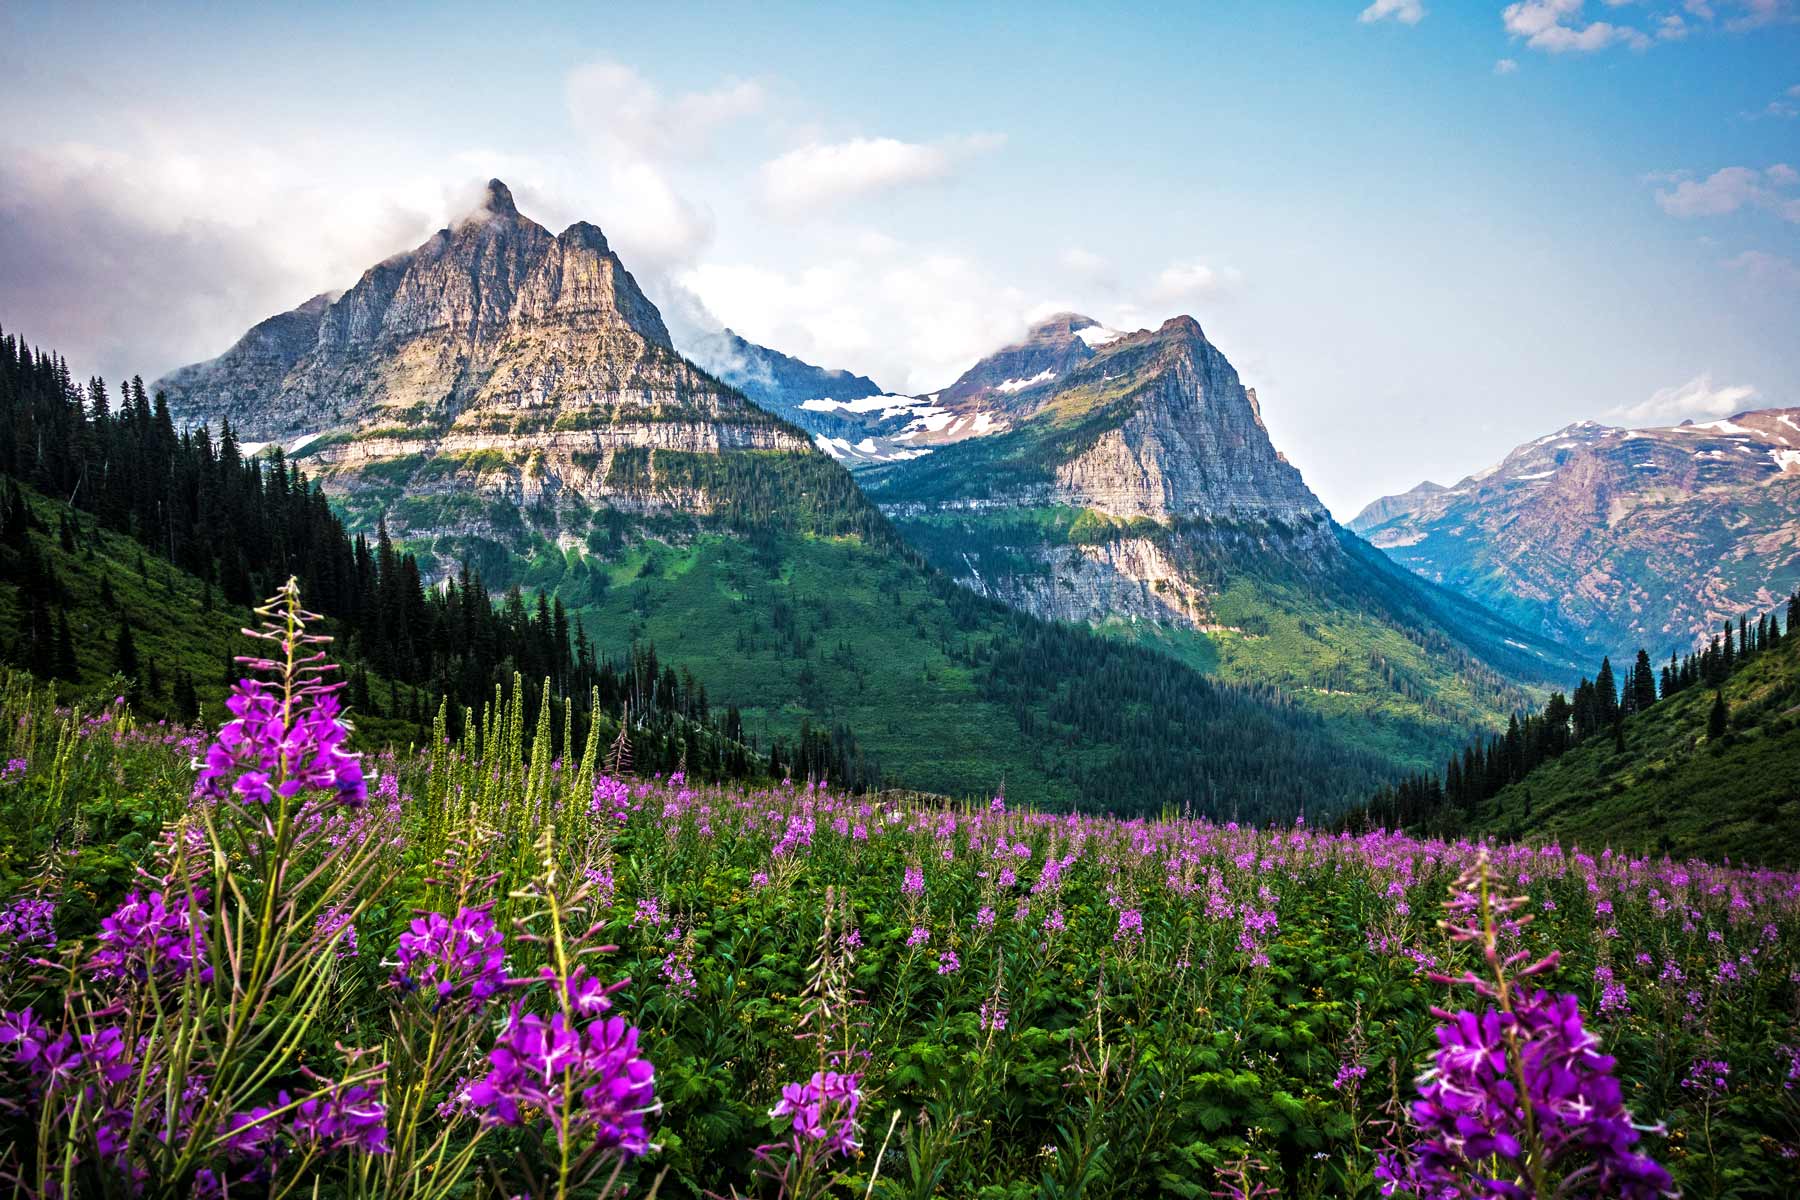 Try These 15 Amazing Things to Do on Your Visit to Glacier National Park